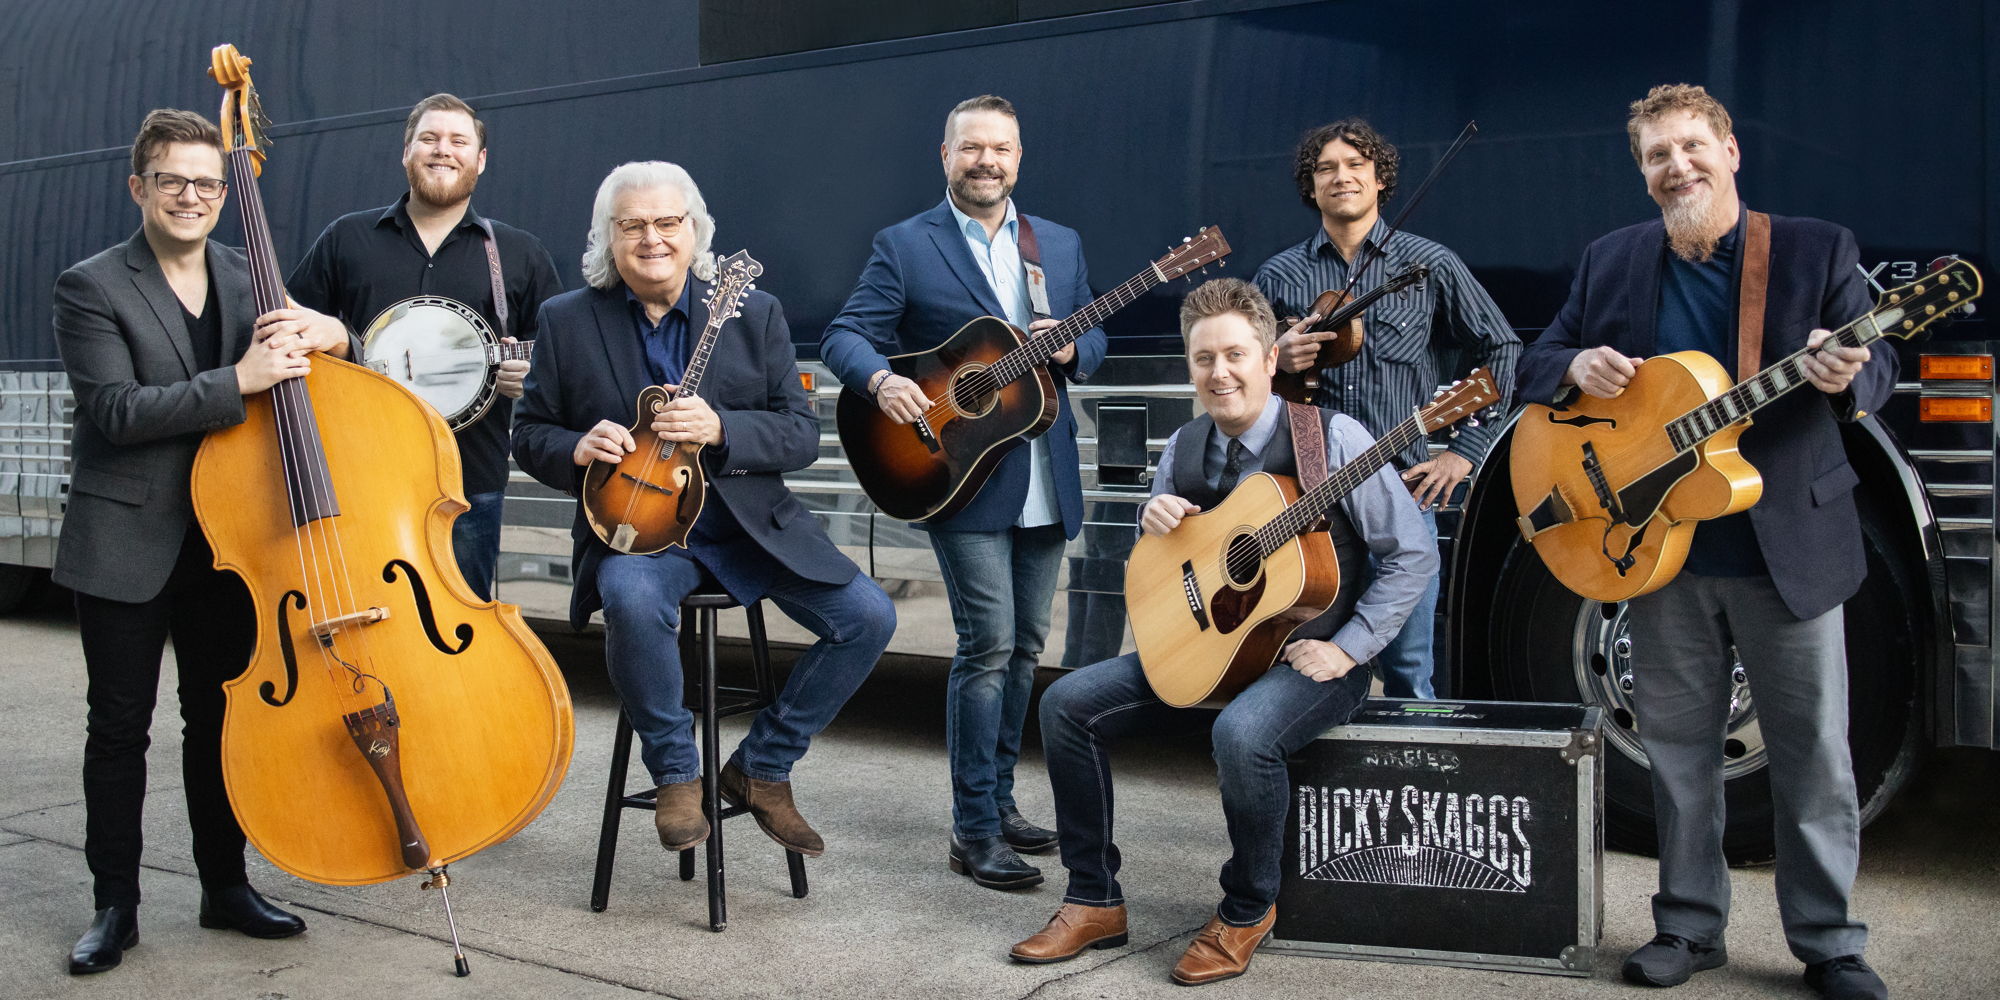 Ricky Skaggs and Kentucky Thunder promotional image